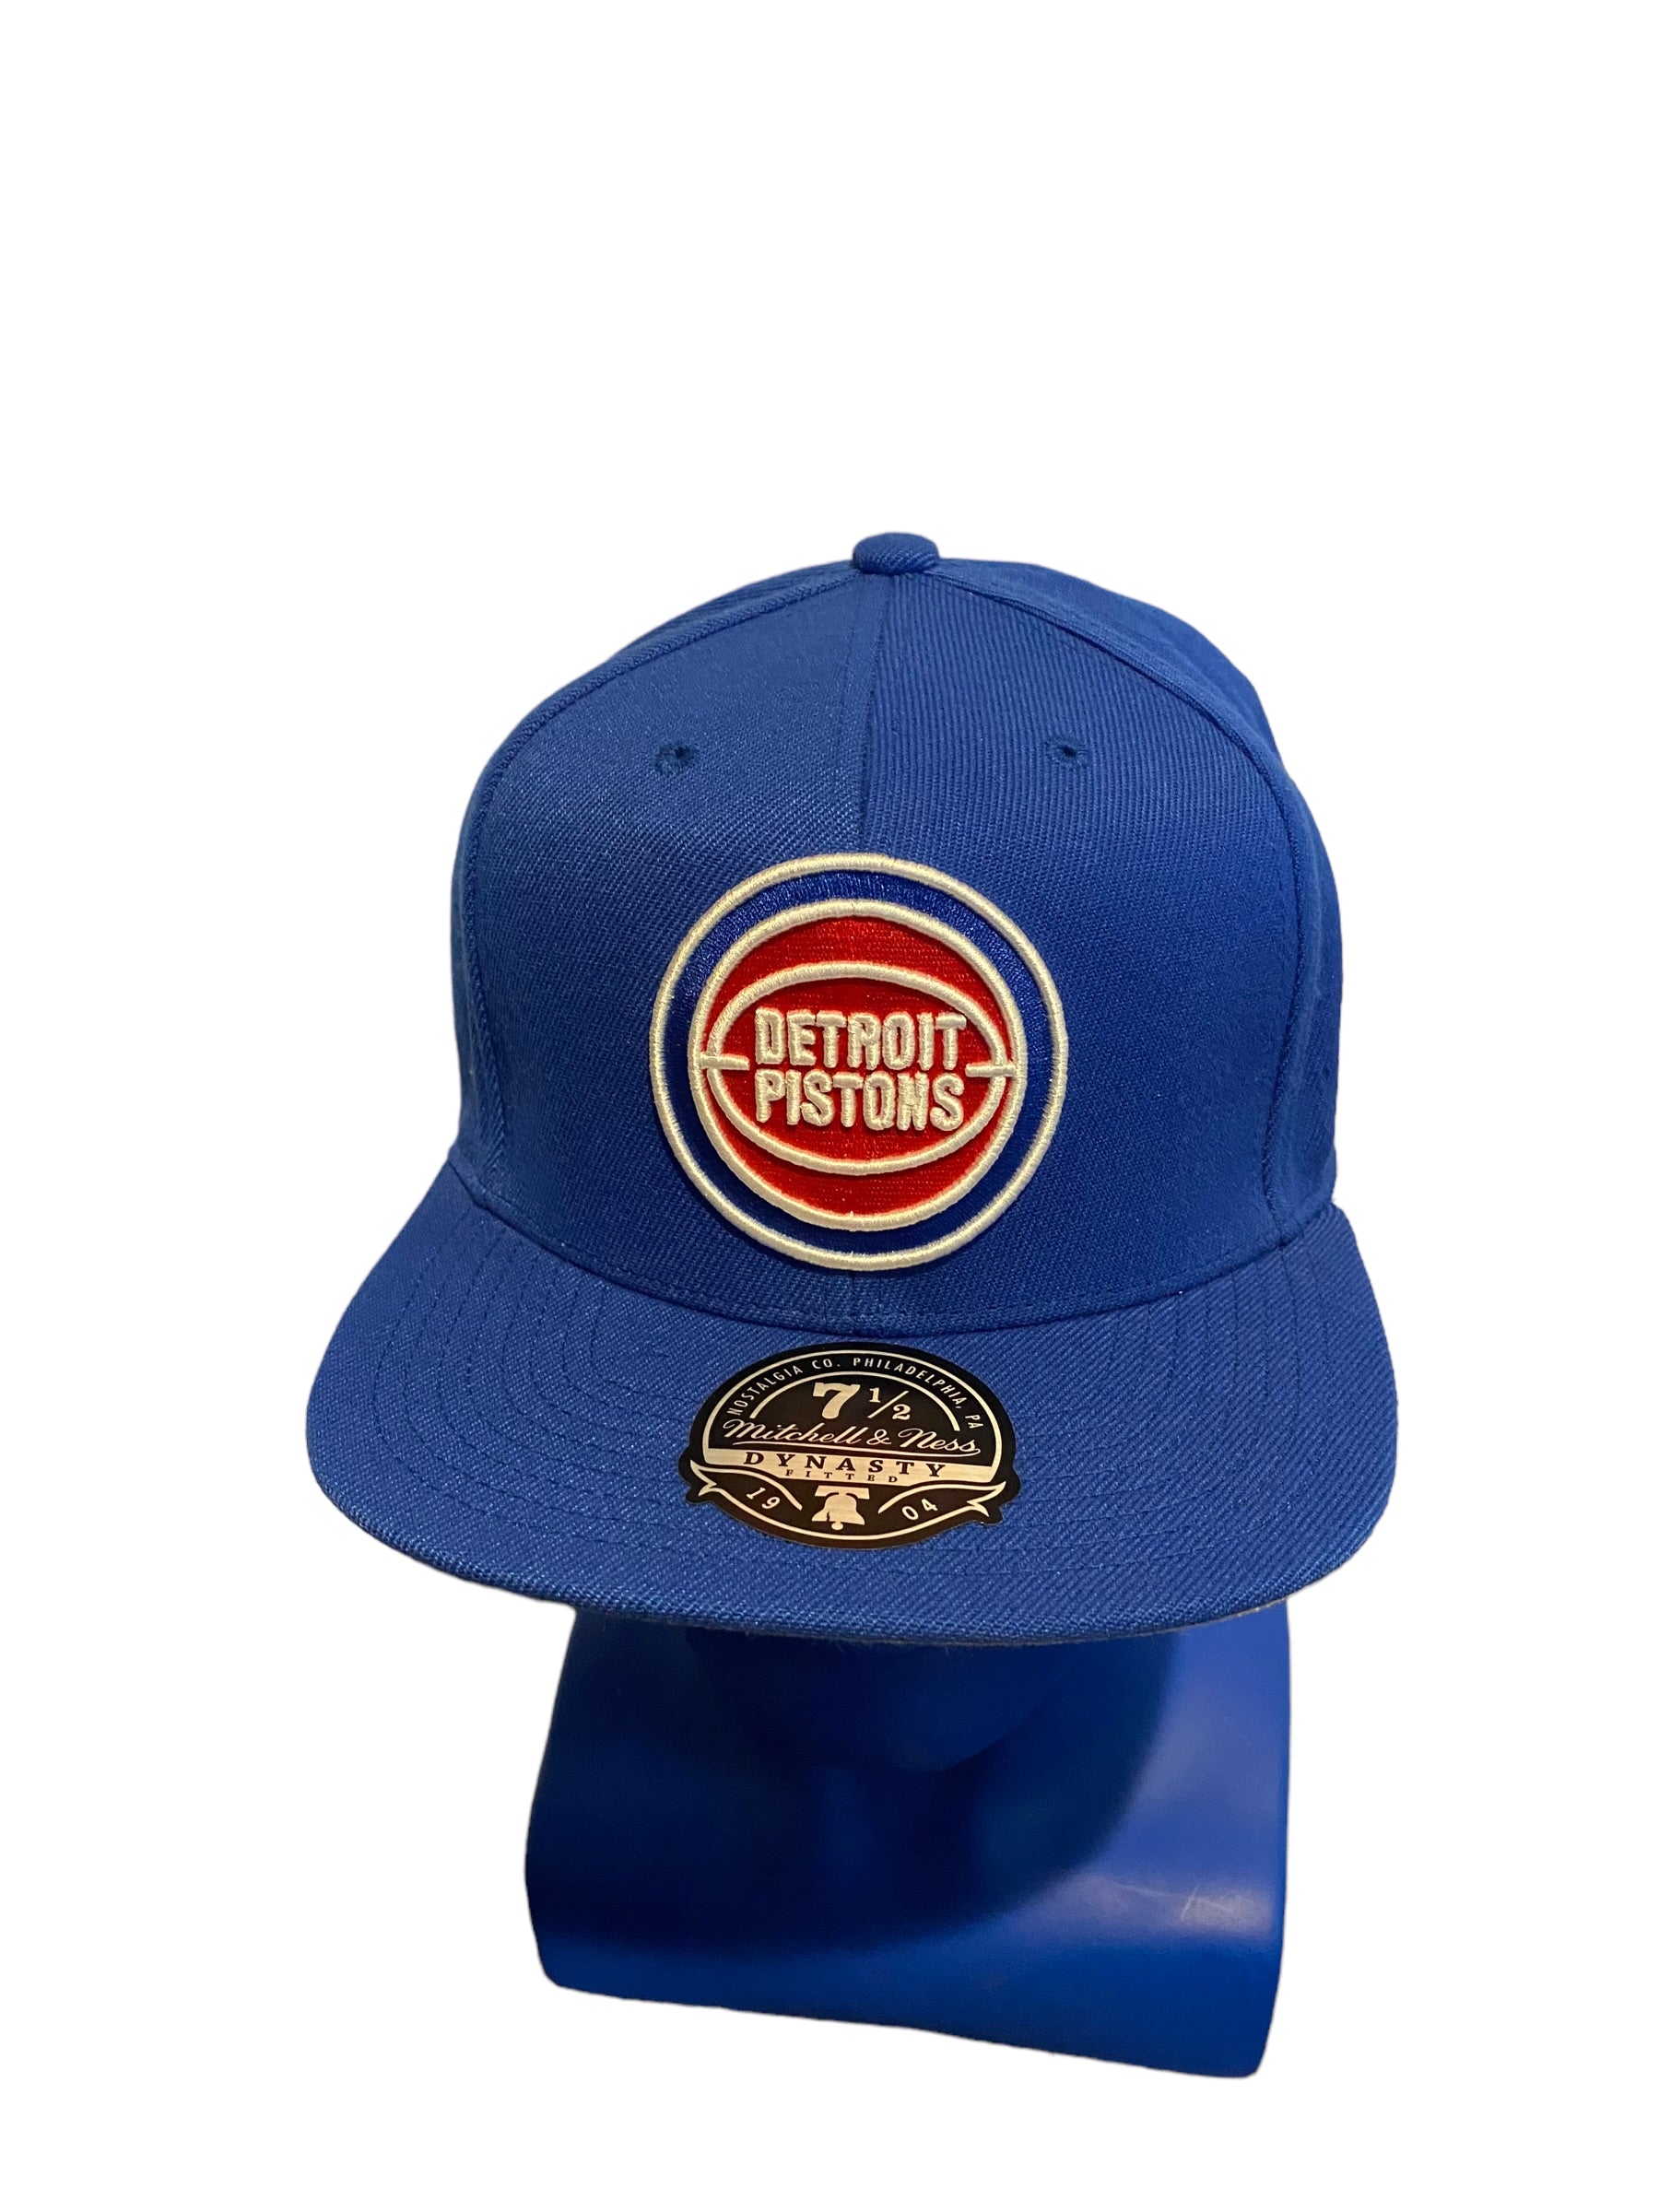 mitchell ness dynasty fitted hat 7 1/2 detroit pistons 1989 nba finals